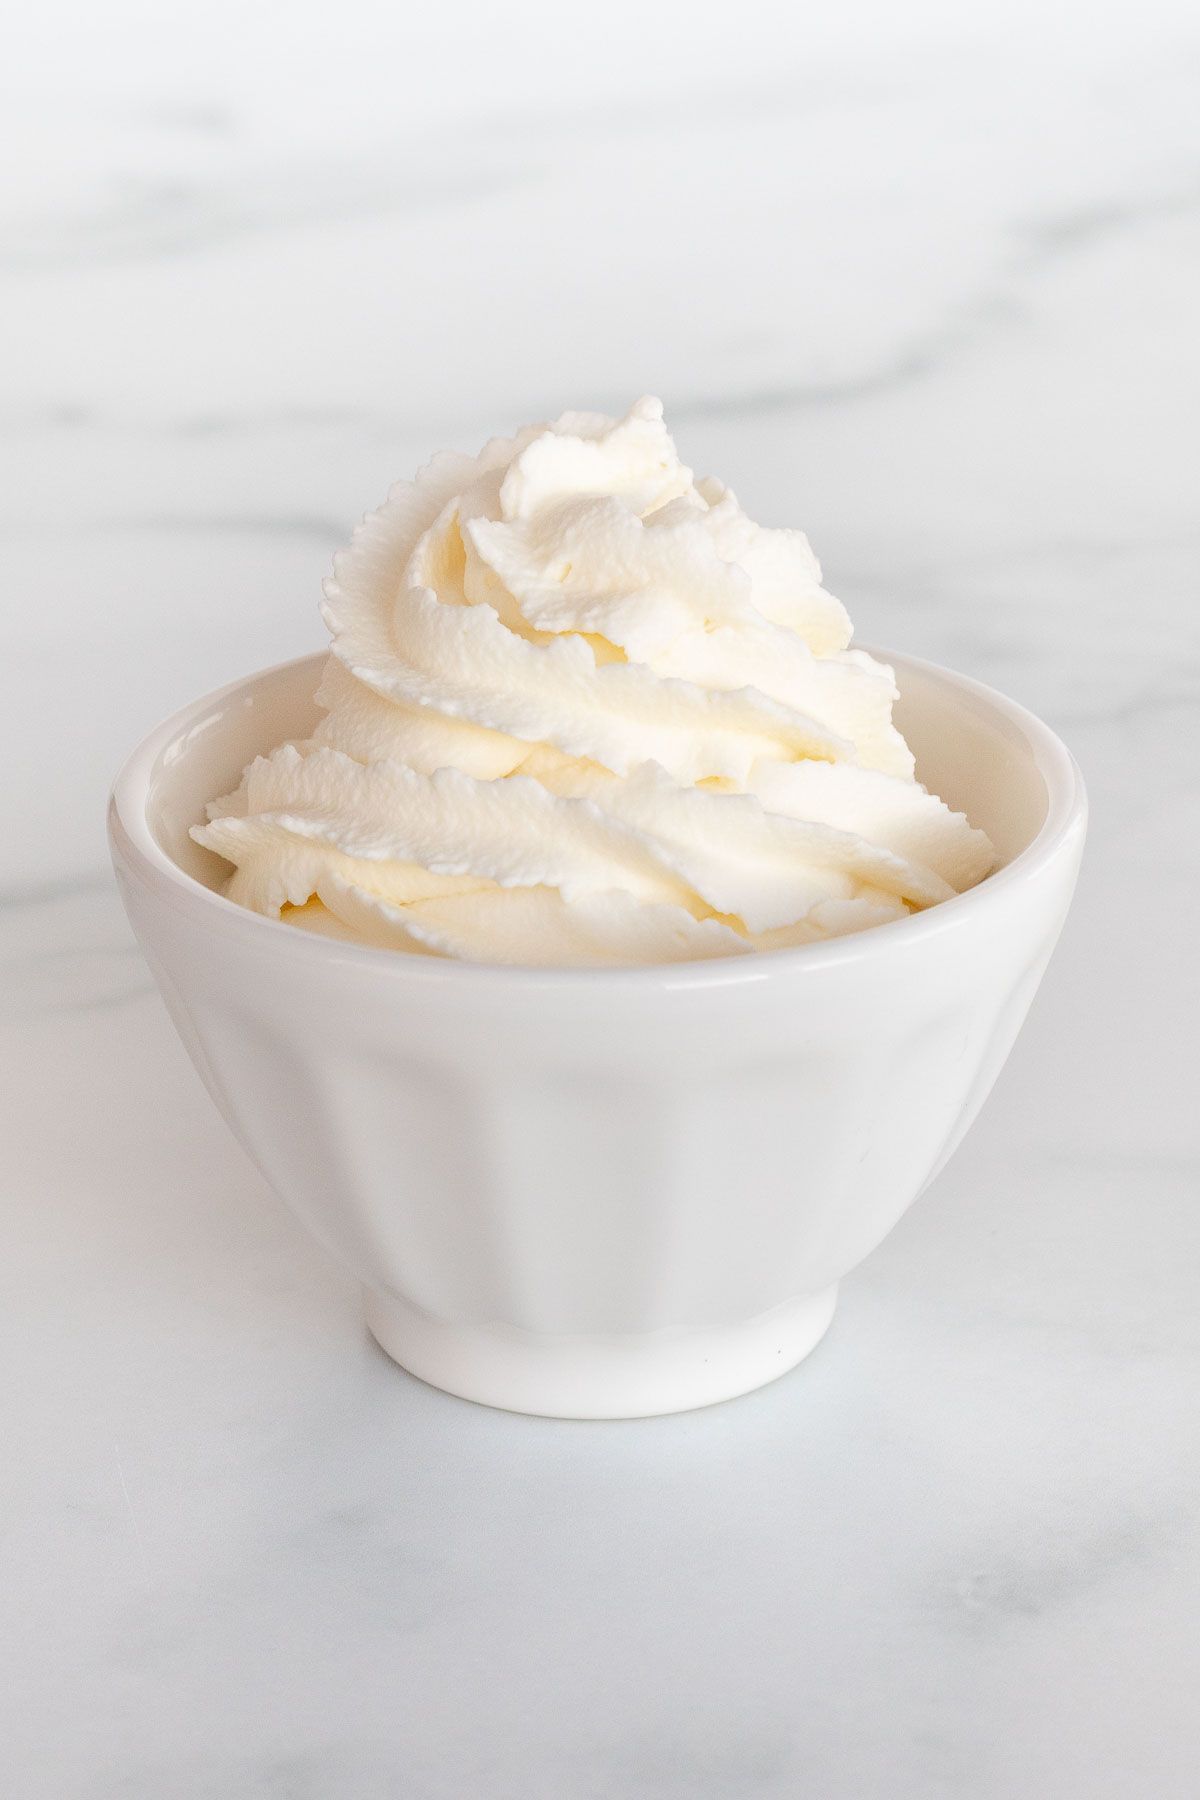 A white bowl full of whipped mascarpone cream on a marble surface.